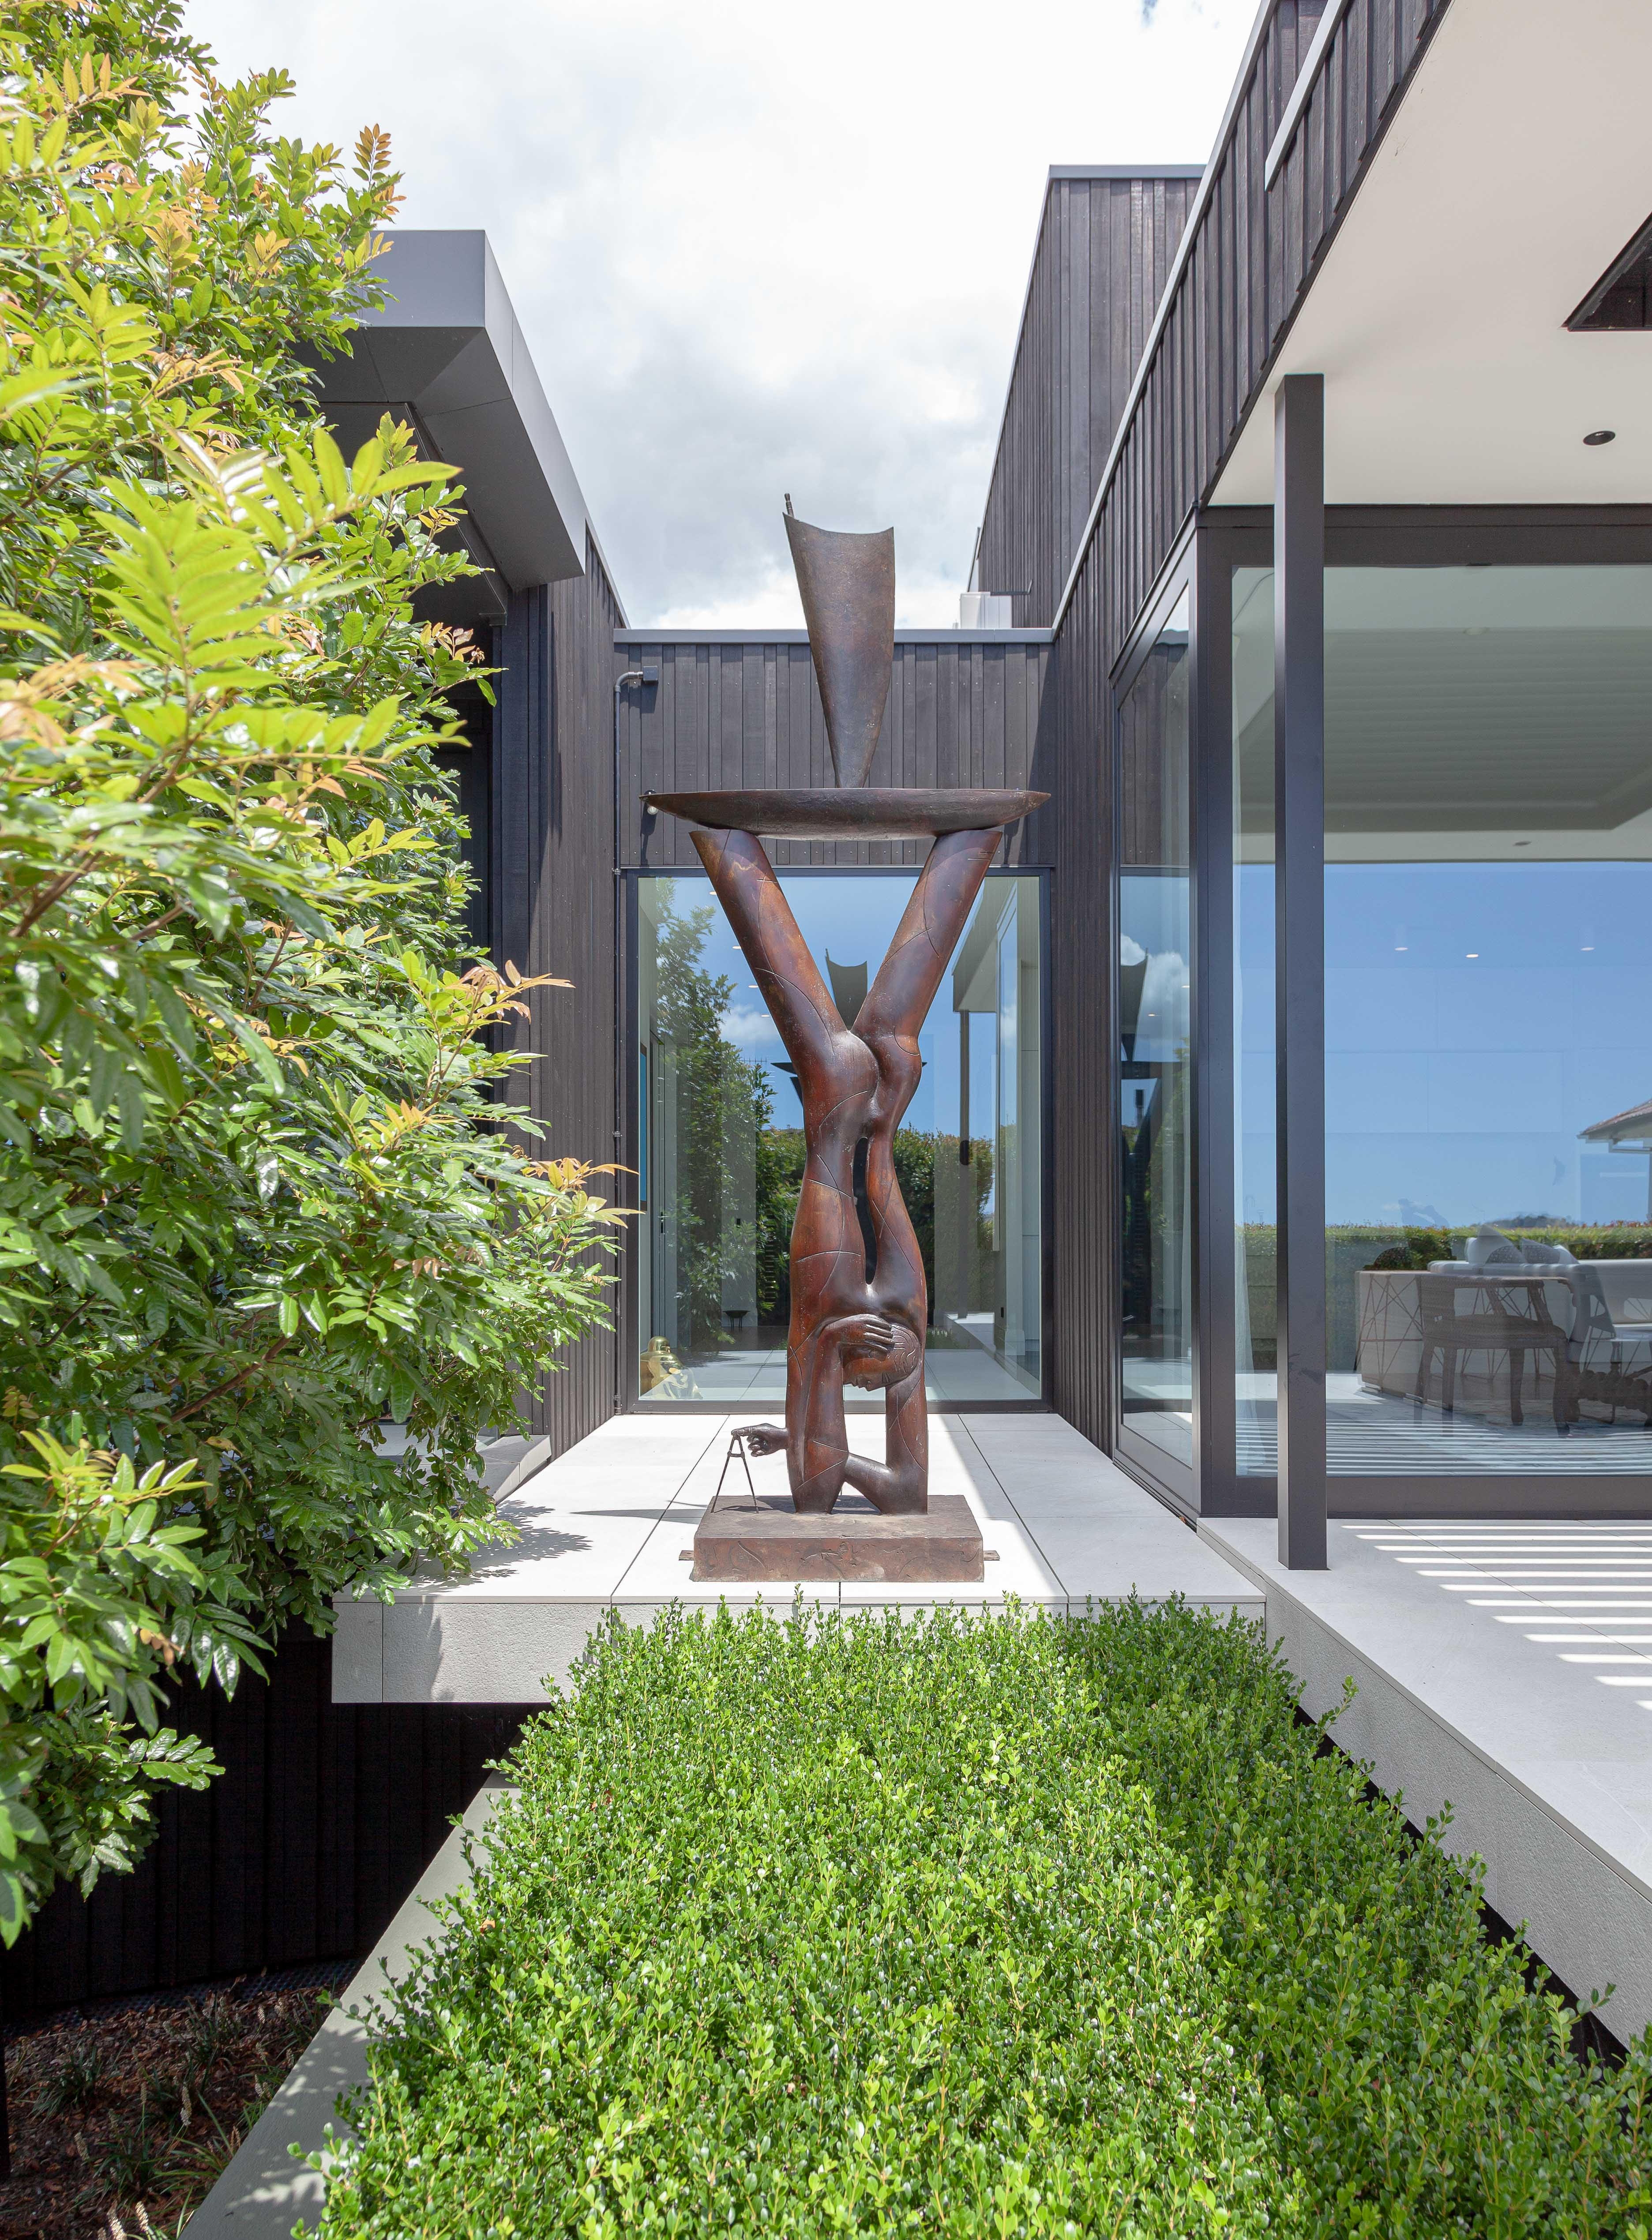 Here, a Paul Dibble sculpture is used as the focal point. This home designed by Jessop Architects unfolds around a simple, low maintenance garden designed by Jared Lockhart. Image - John Williams. 